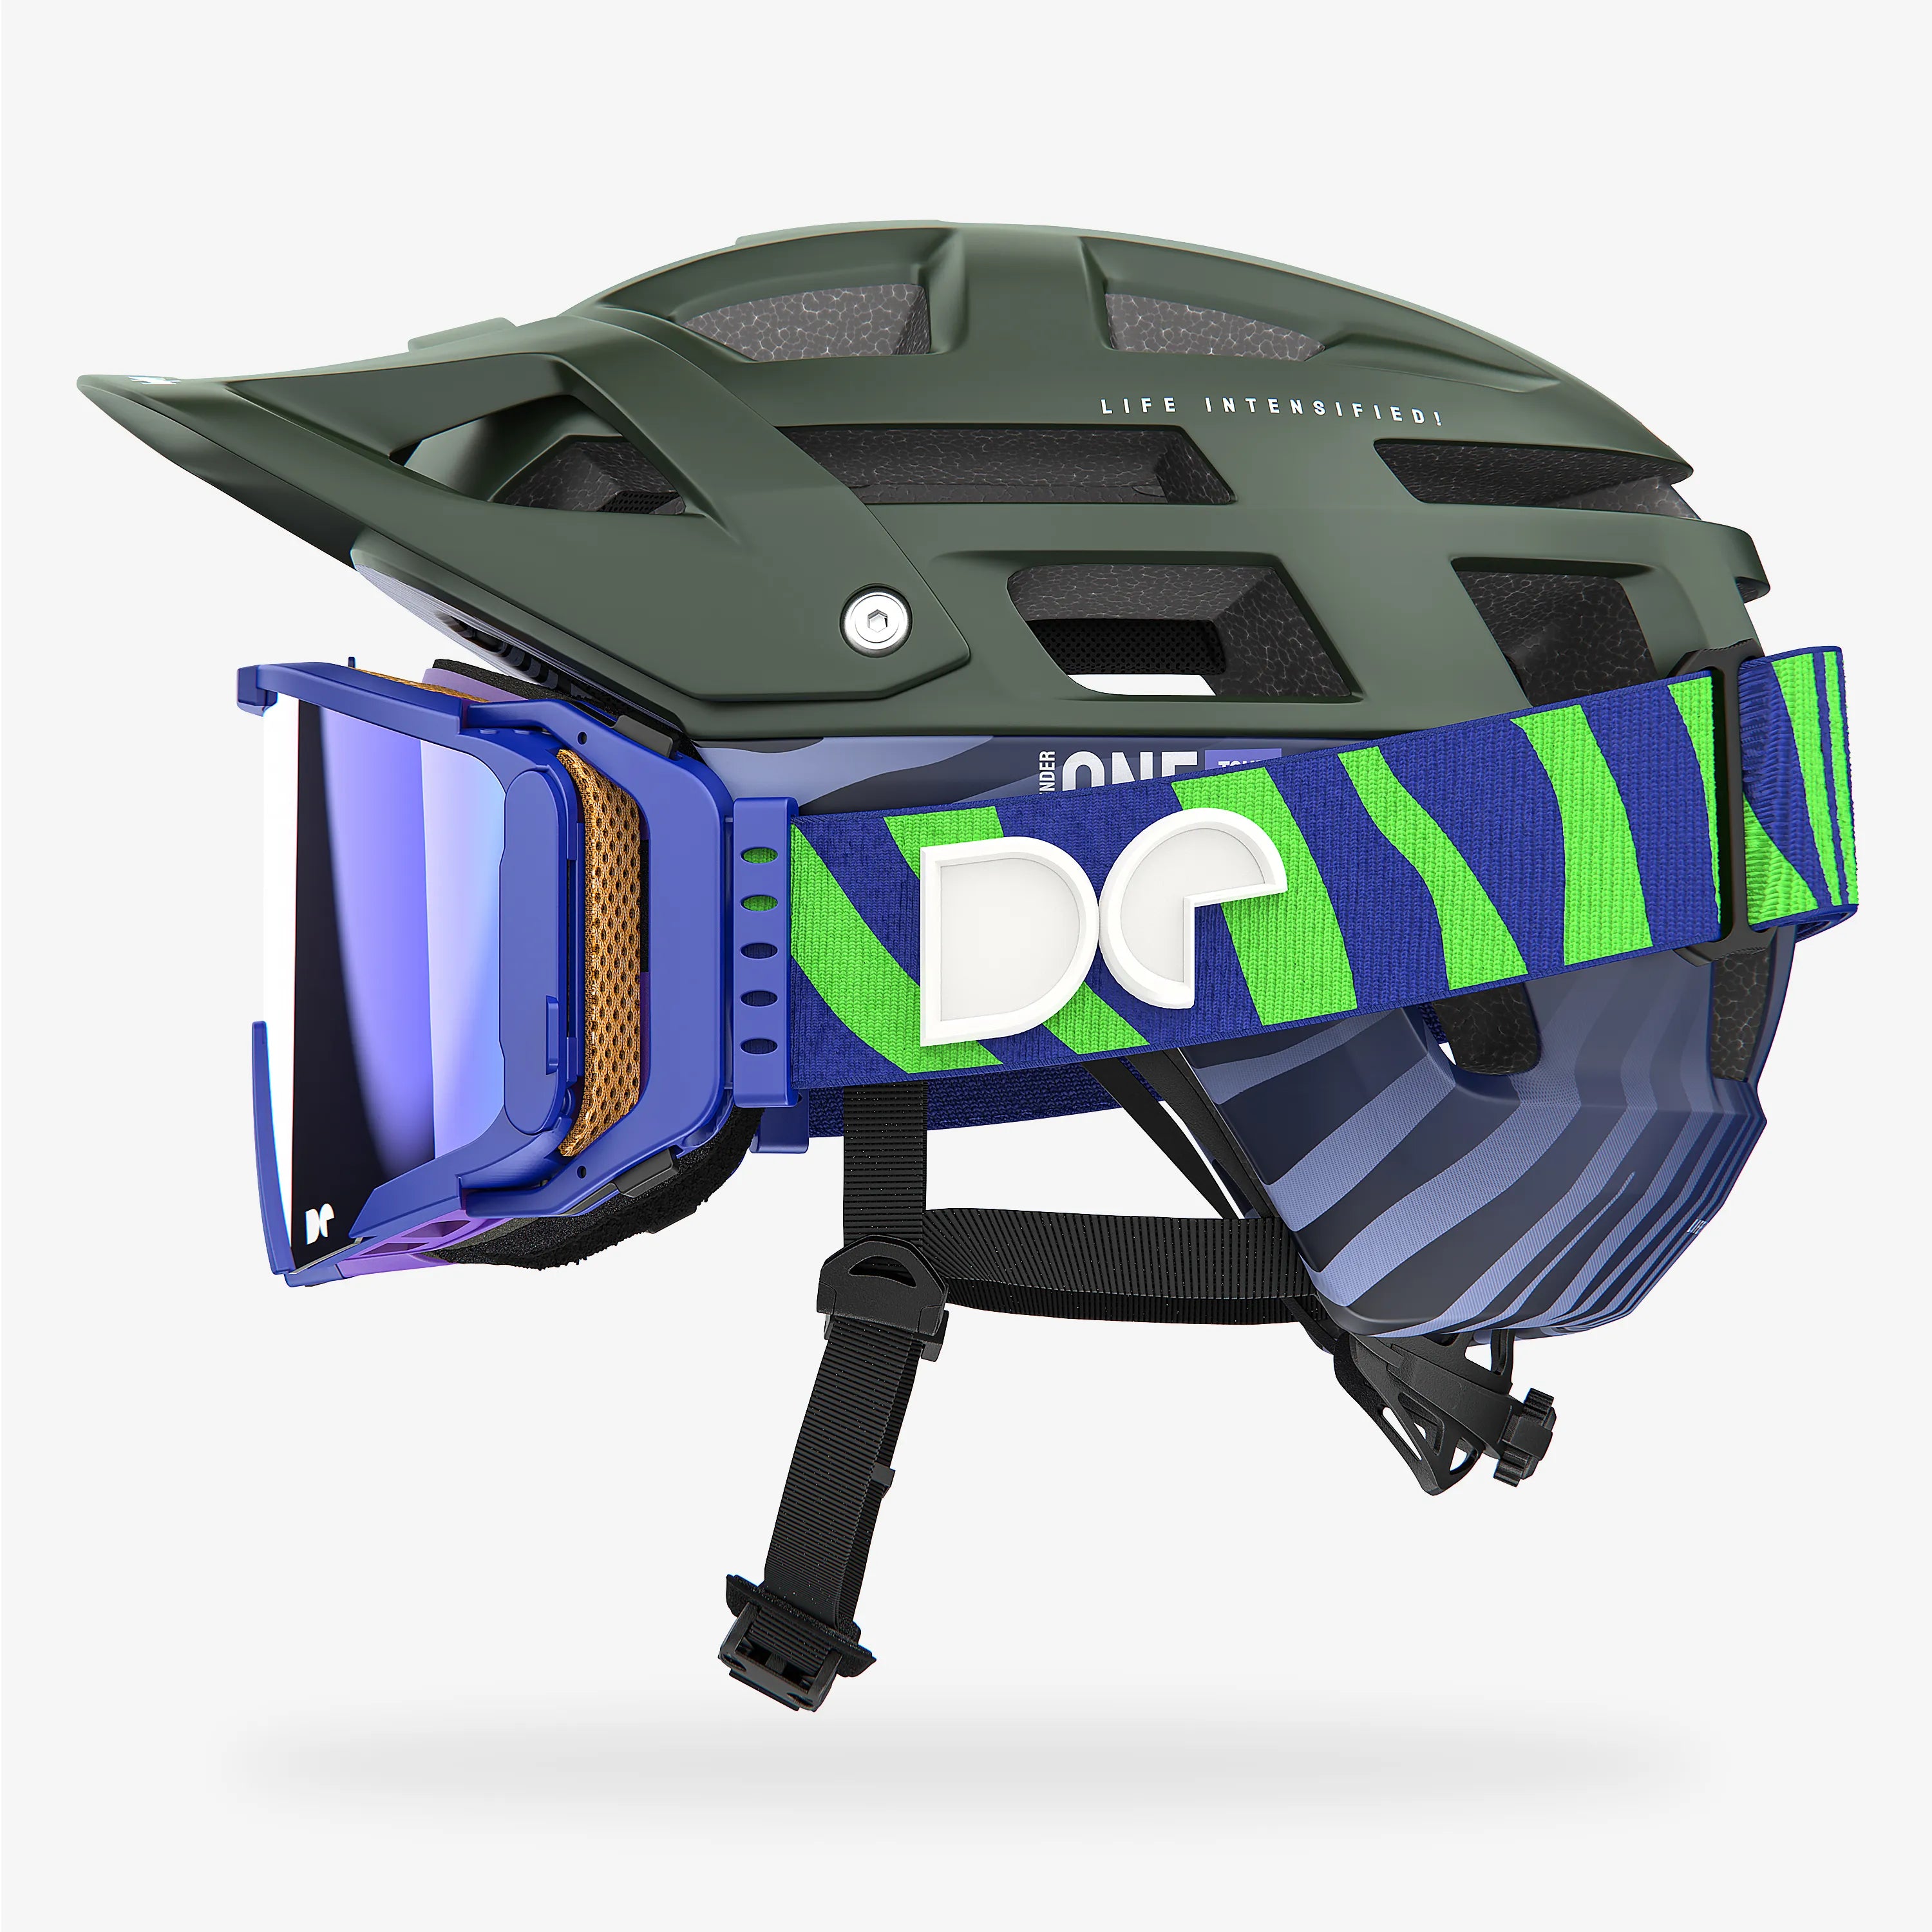 Defender One Tour Forest Green Mountain Bike Helmet + Sporter Boostup All Road Goggle フォレストグリーン マウンテンバイクヘルメット + MXゴーグル